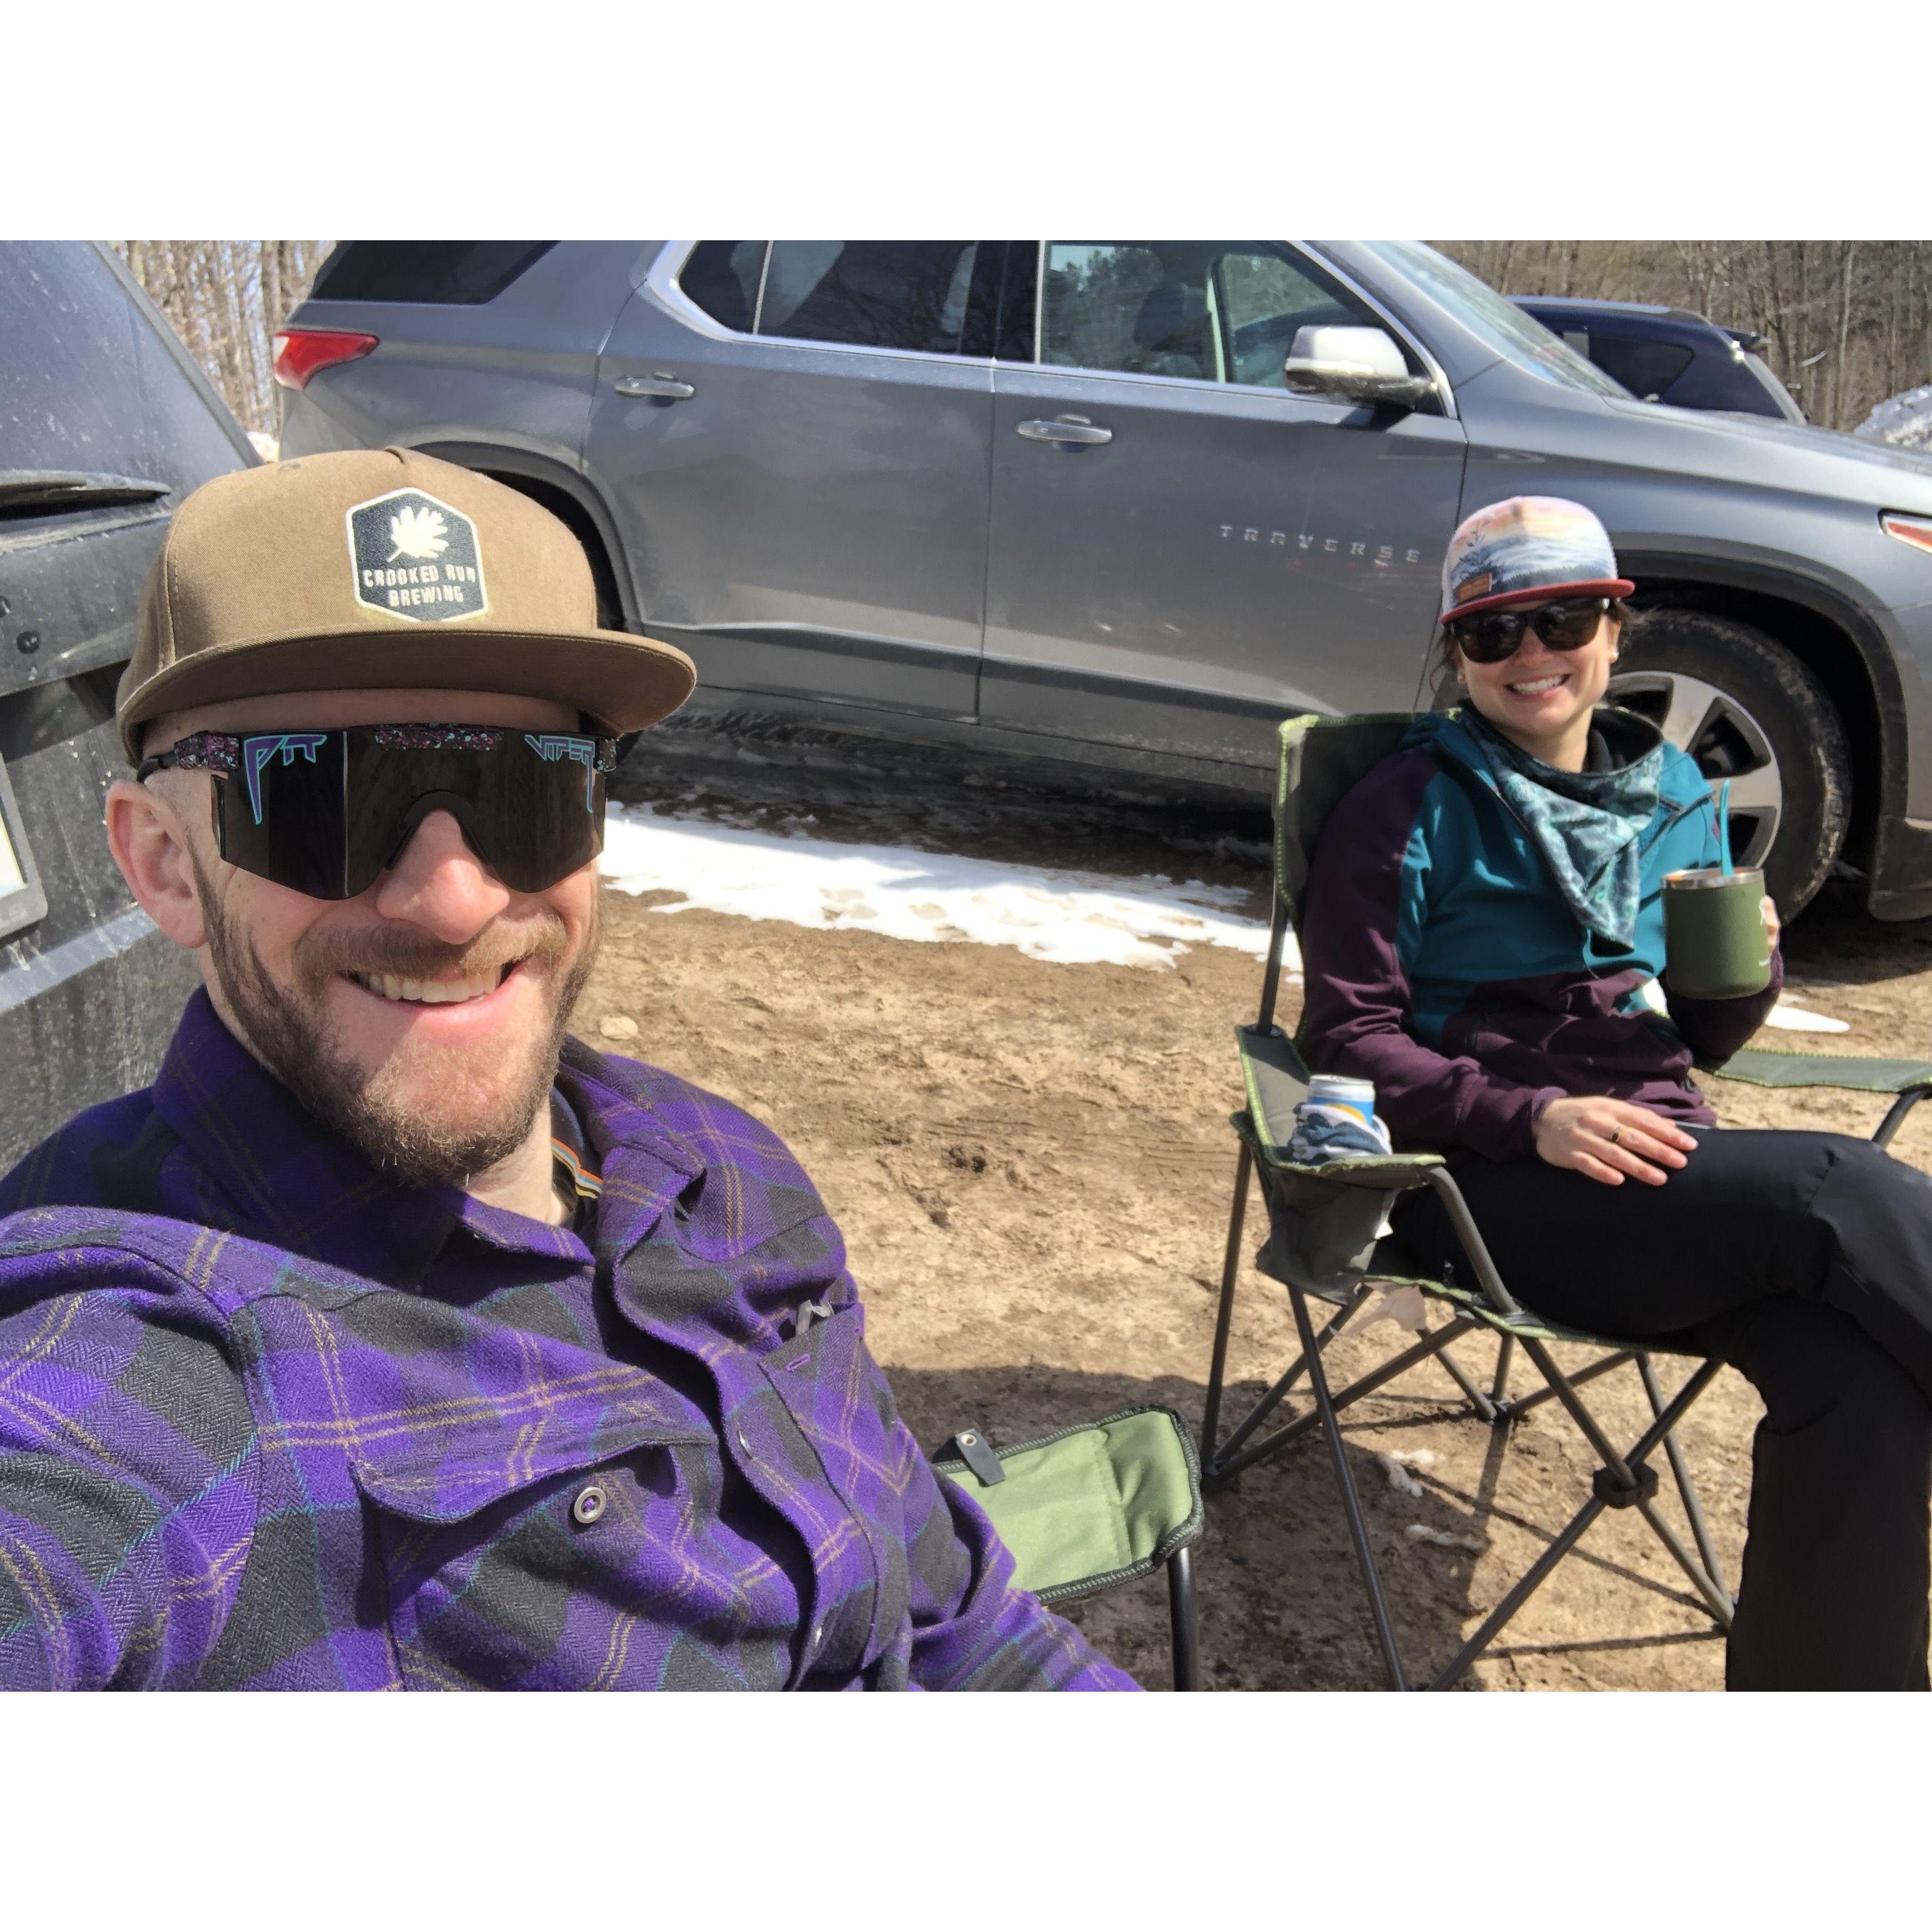 Last day of the '22 - '23 Ski season!  Tailgating at our local hill.